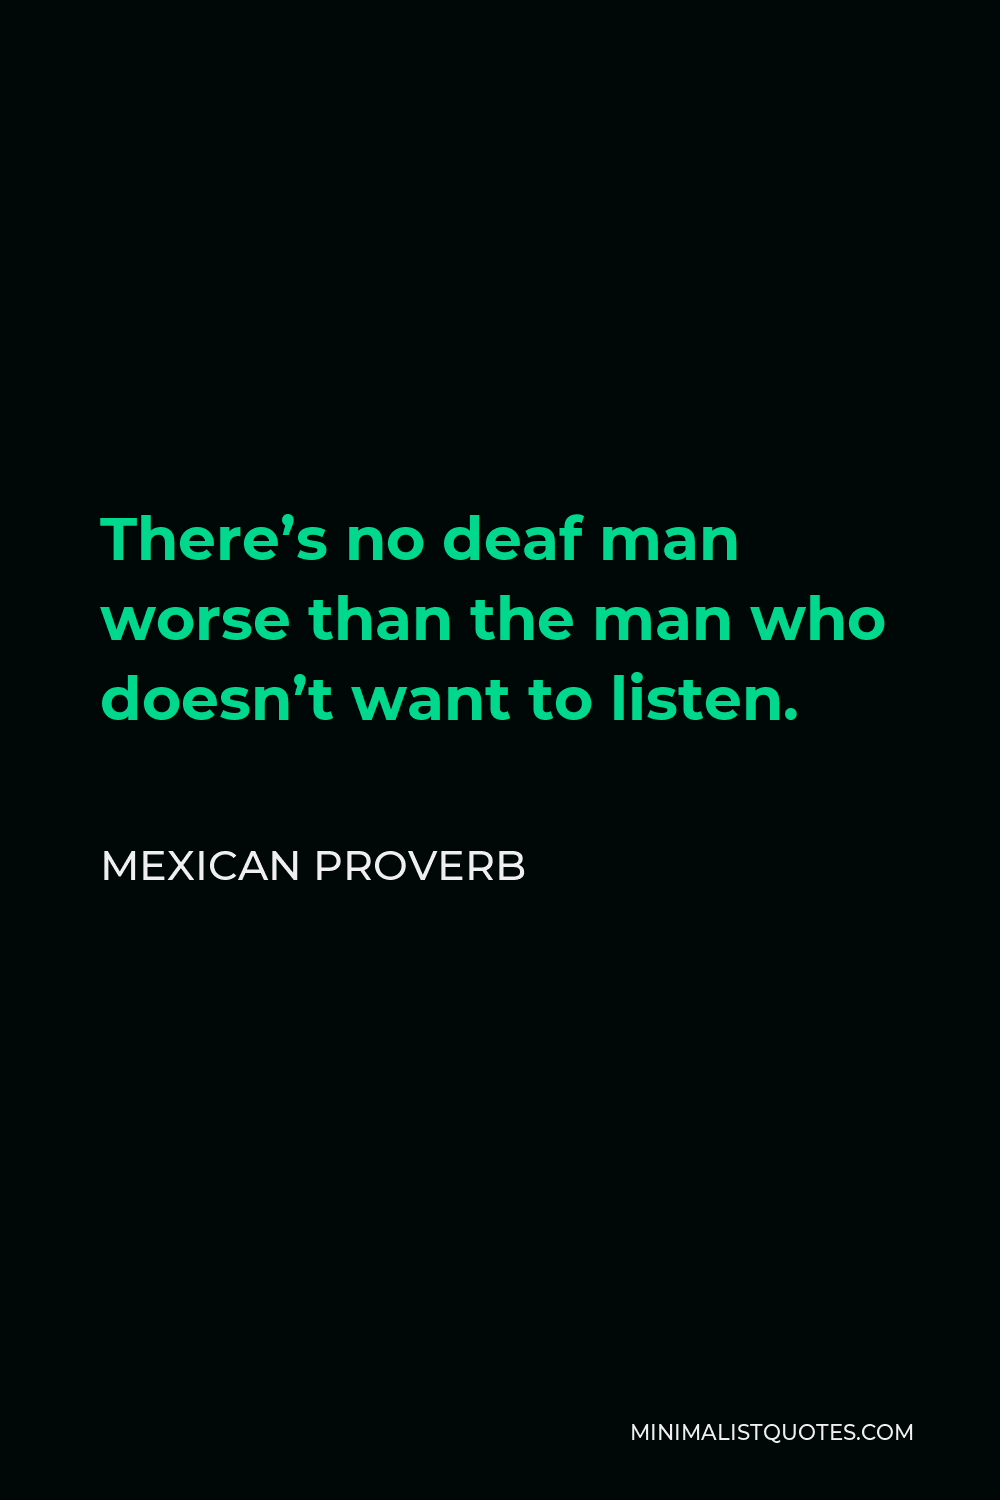 Mexican Proverb Quote - There’s no deaf man worse than the man who doesn’t want to listen.